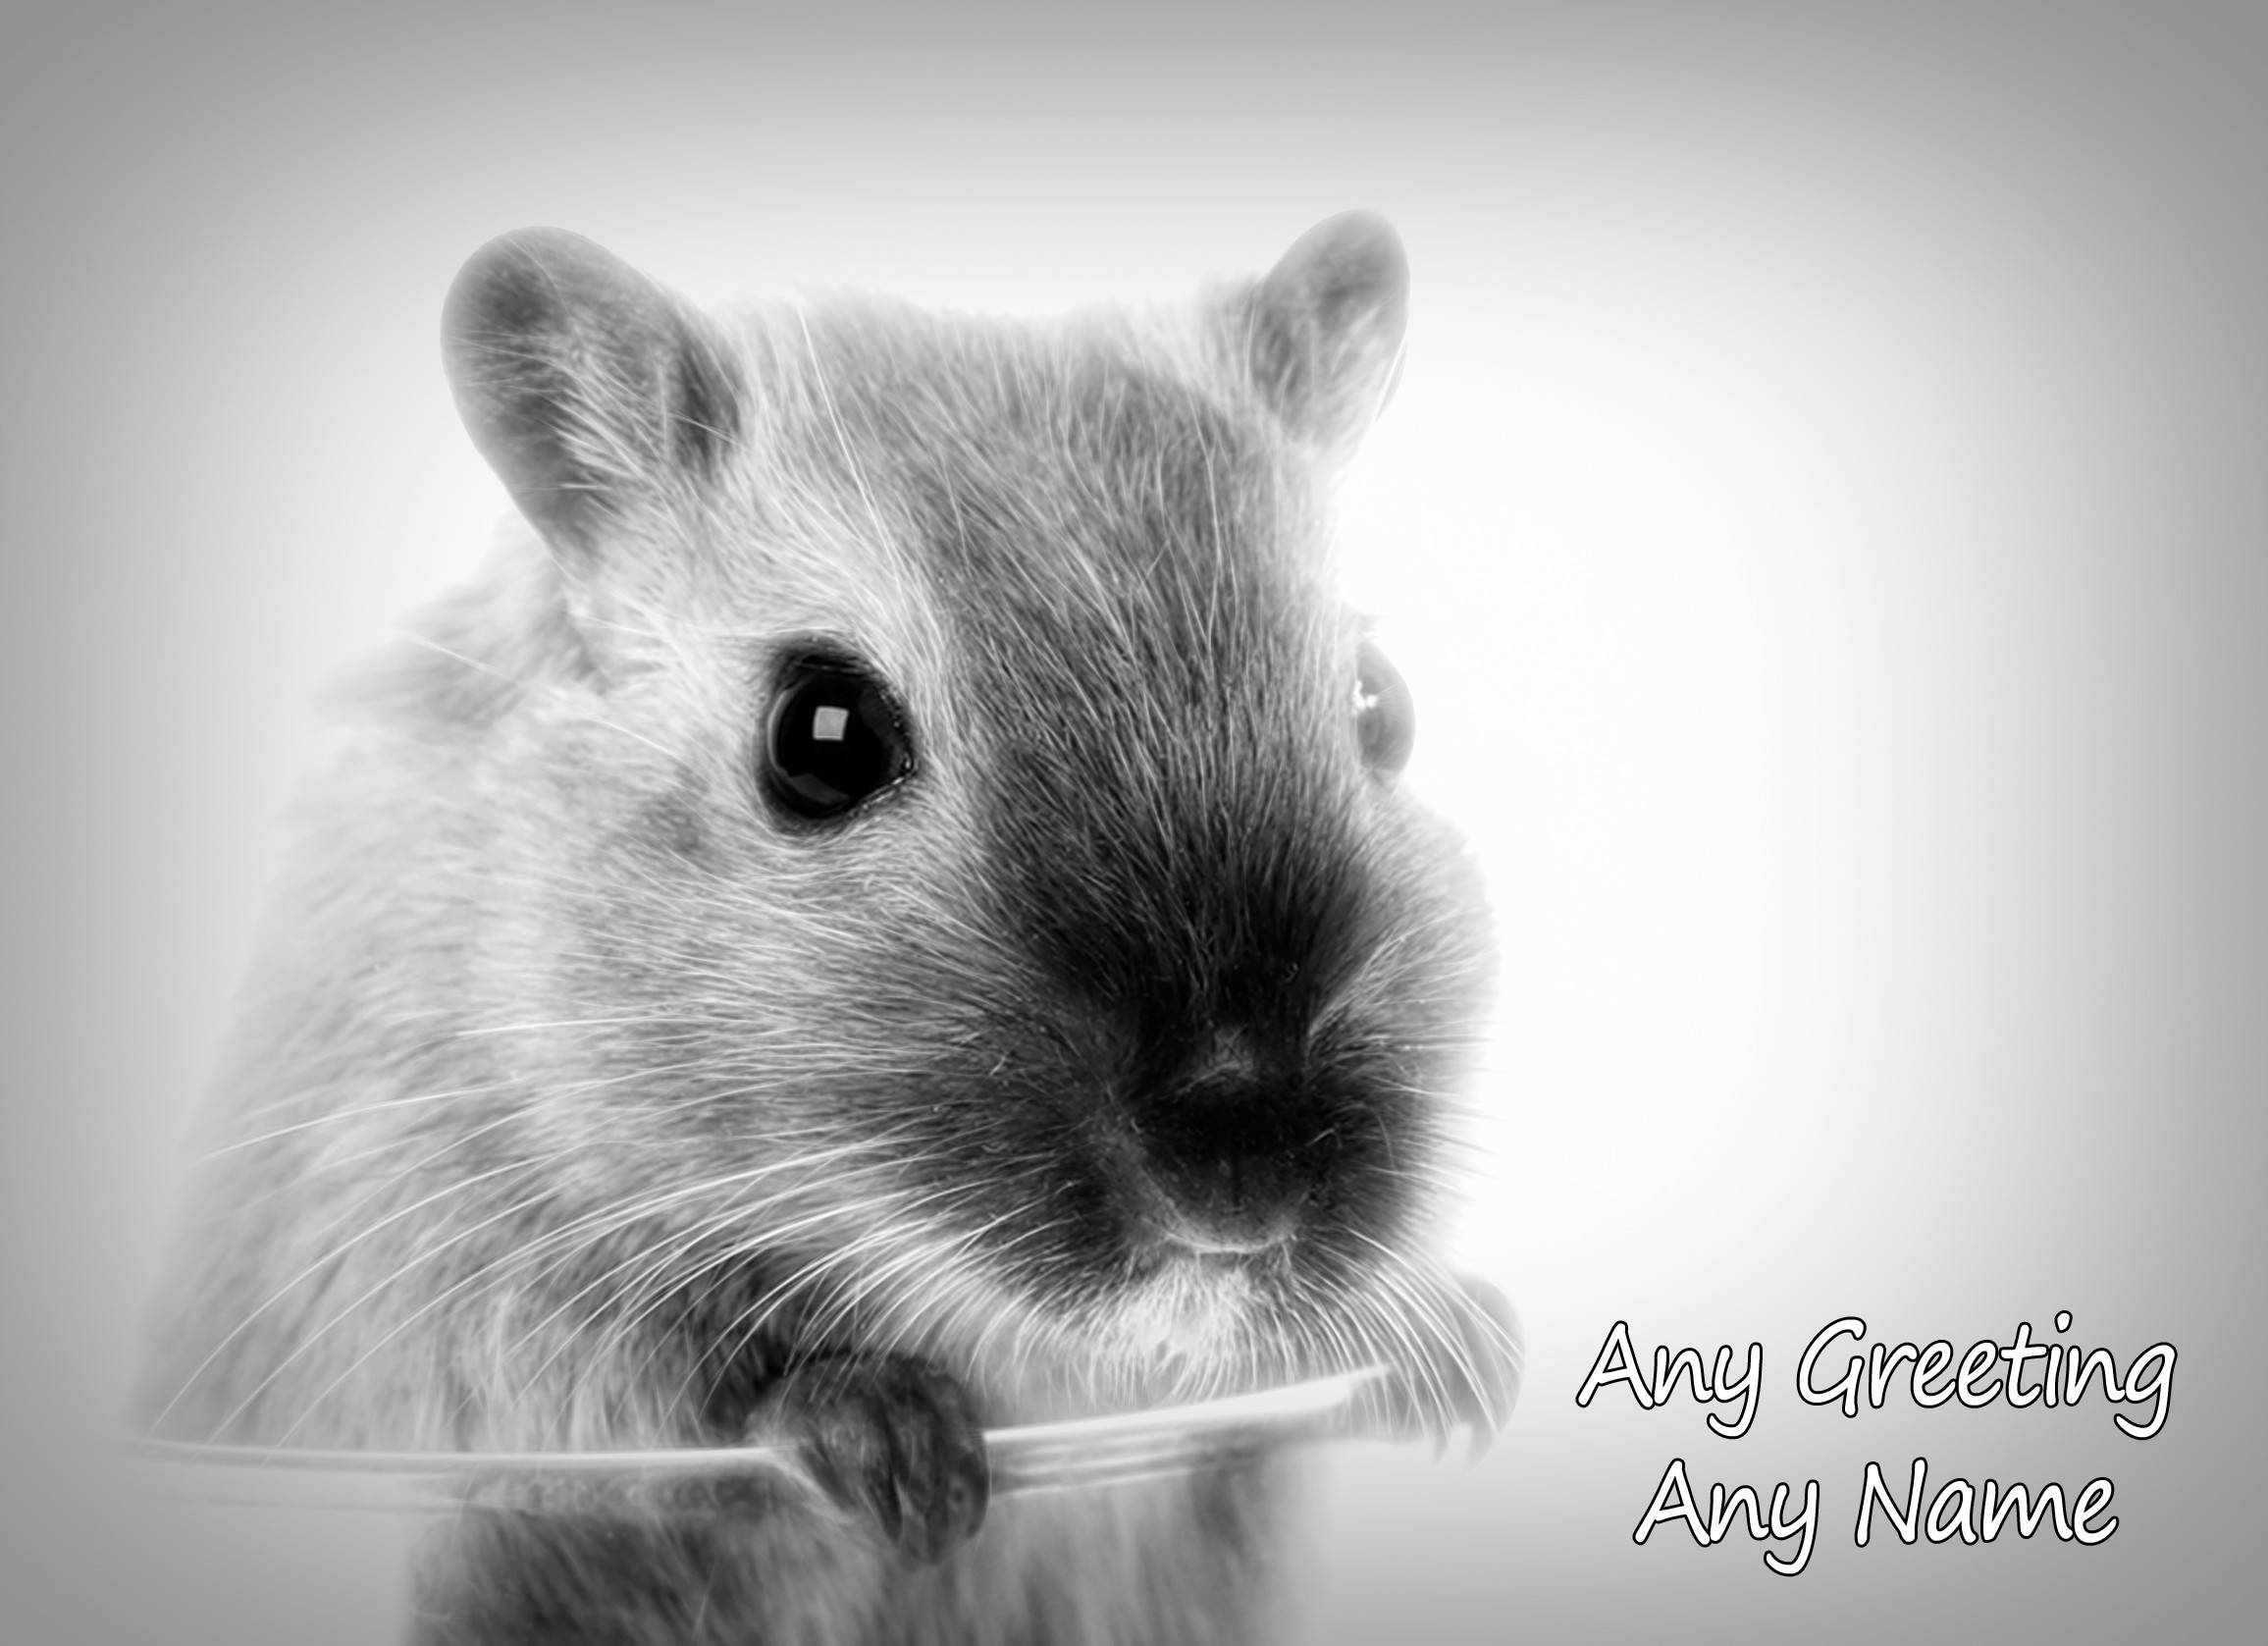 Personalised Gerbil Black and White Art Greeting Card (Birthday, Christmas, Any Occasion)